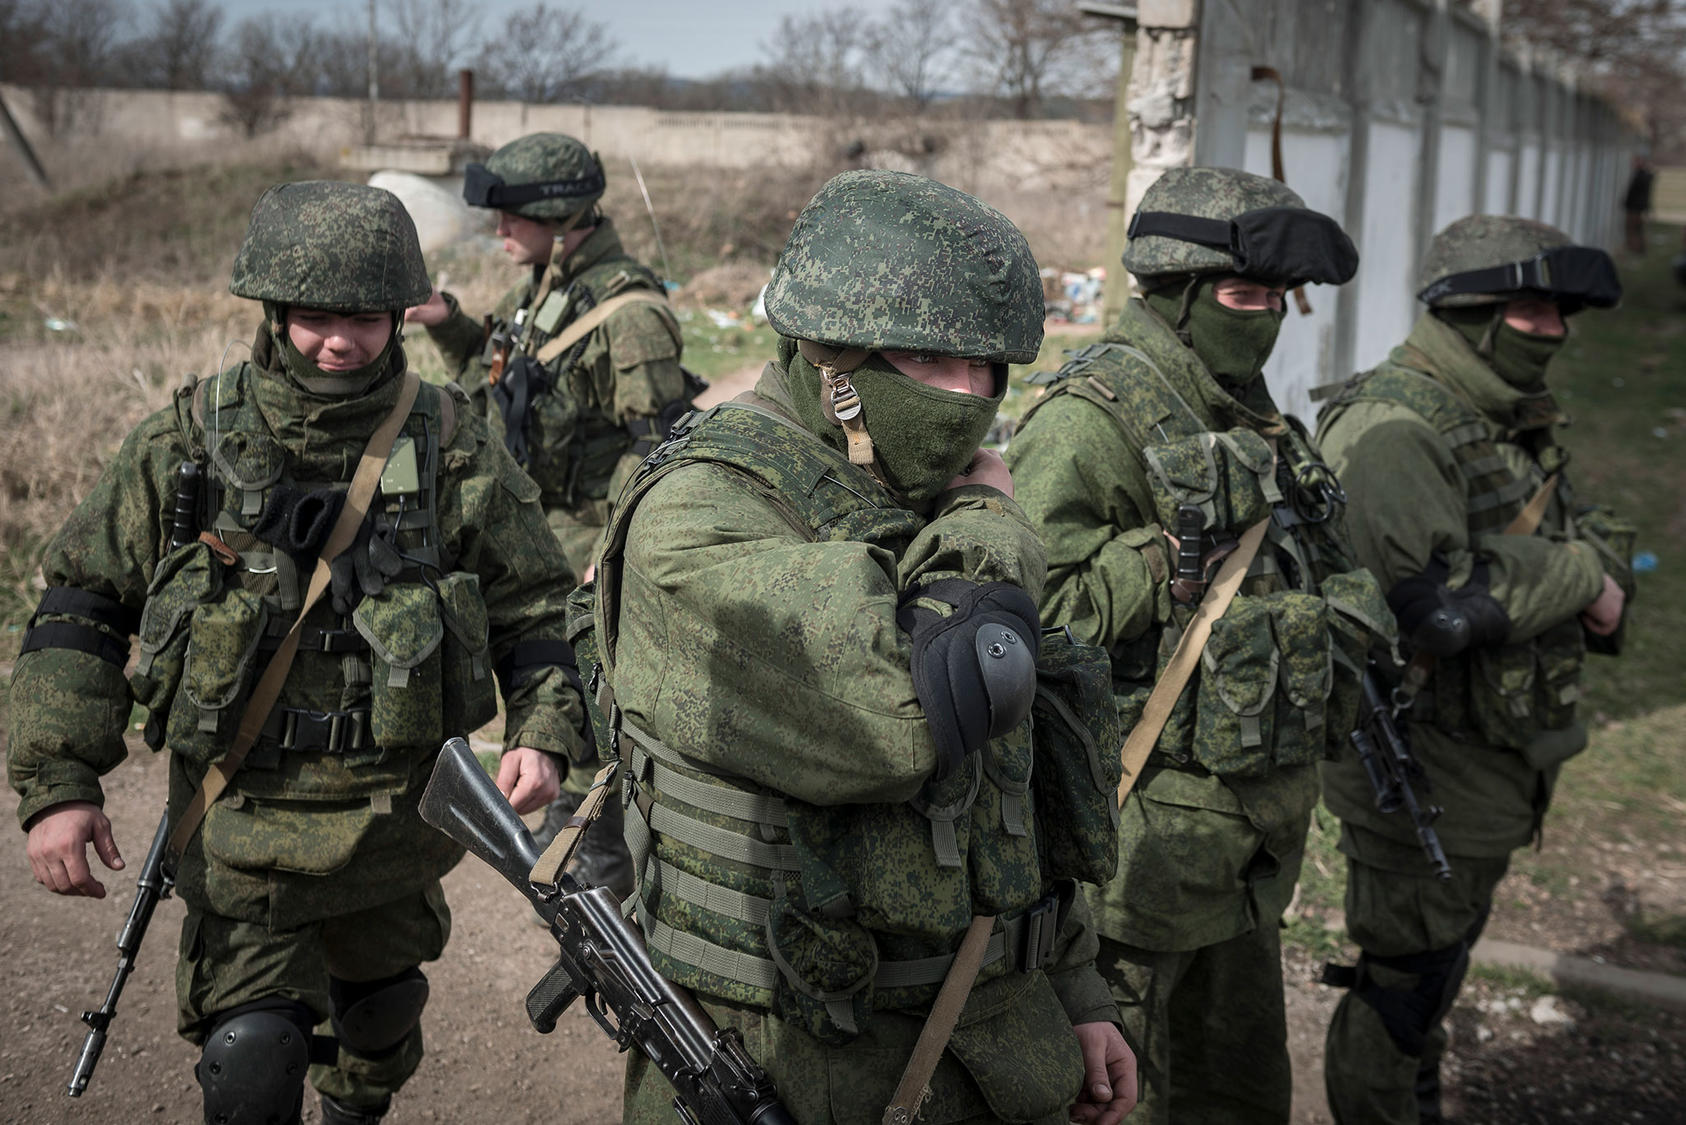 Unidentified soldiers in Crimea, March 6, 2014. Russia reclaimed the territory from Ukraine, and Russian President Vladimir Putin later admitted that the troops were Russian special forces. (Sergey Ponomarev/The New York Times)